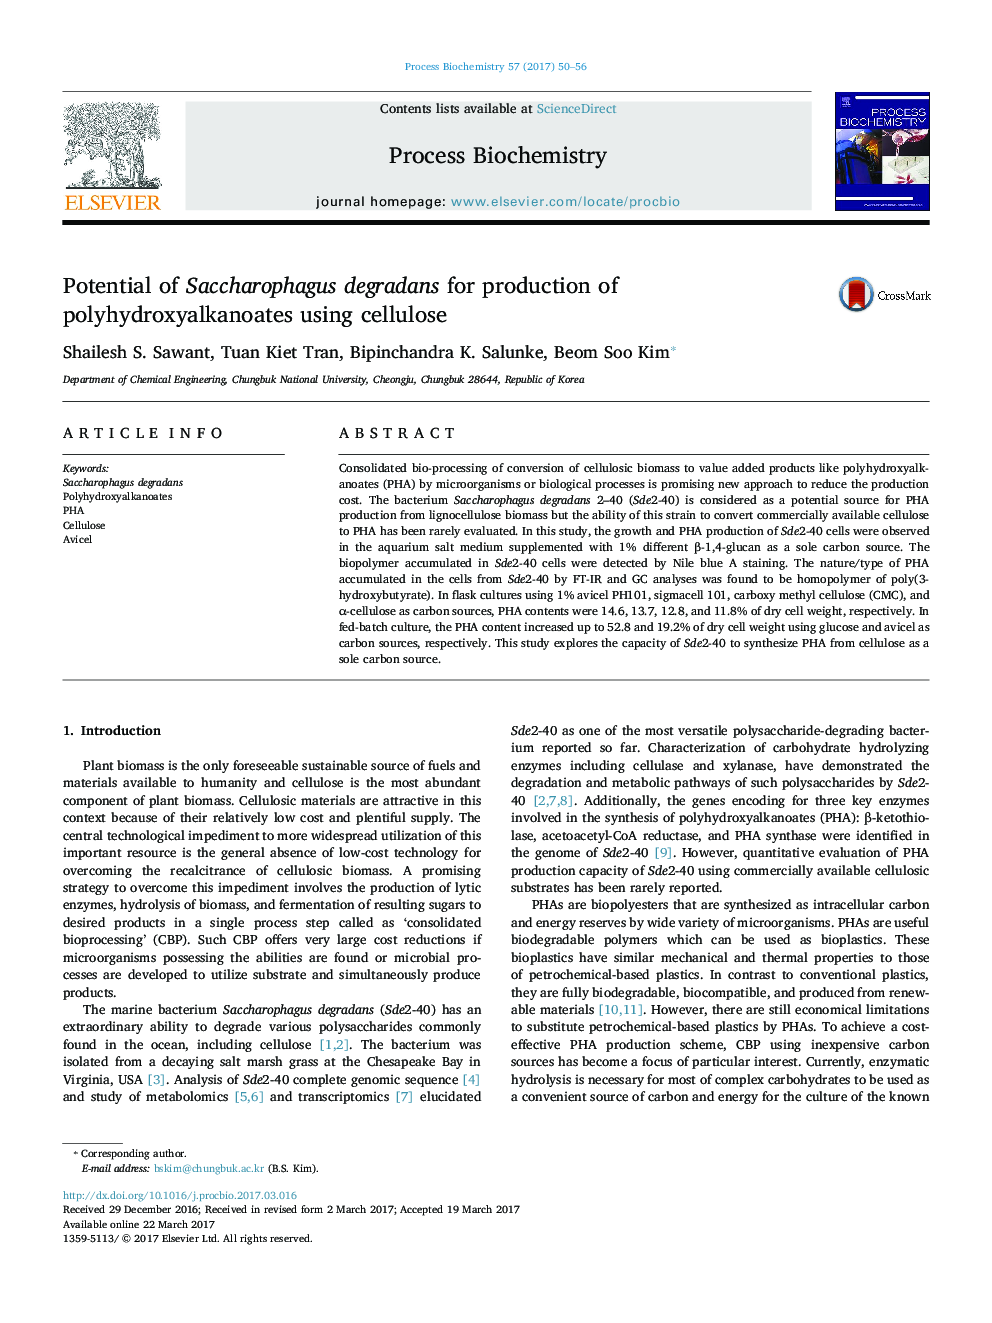 Potential of Saccharophagus degradans for production of polyhydroxyalkanoates using cellulose